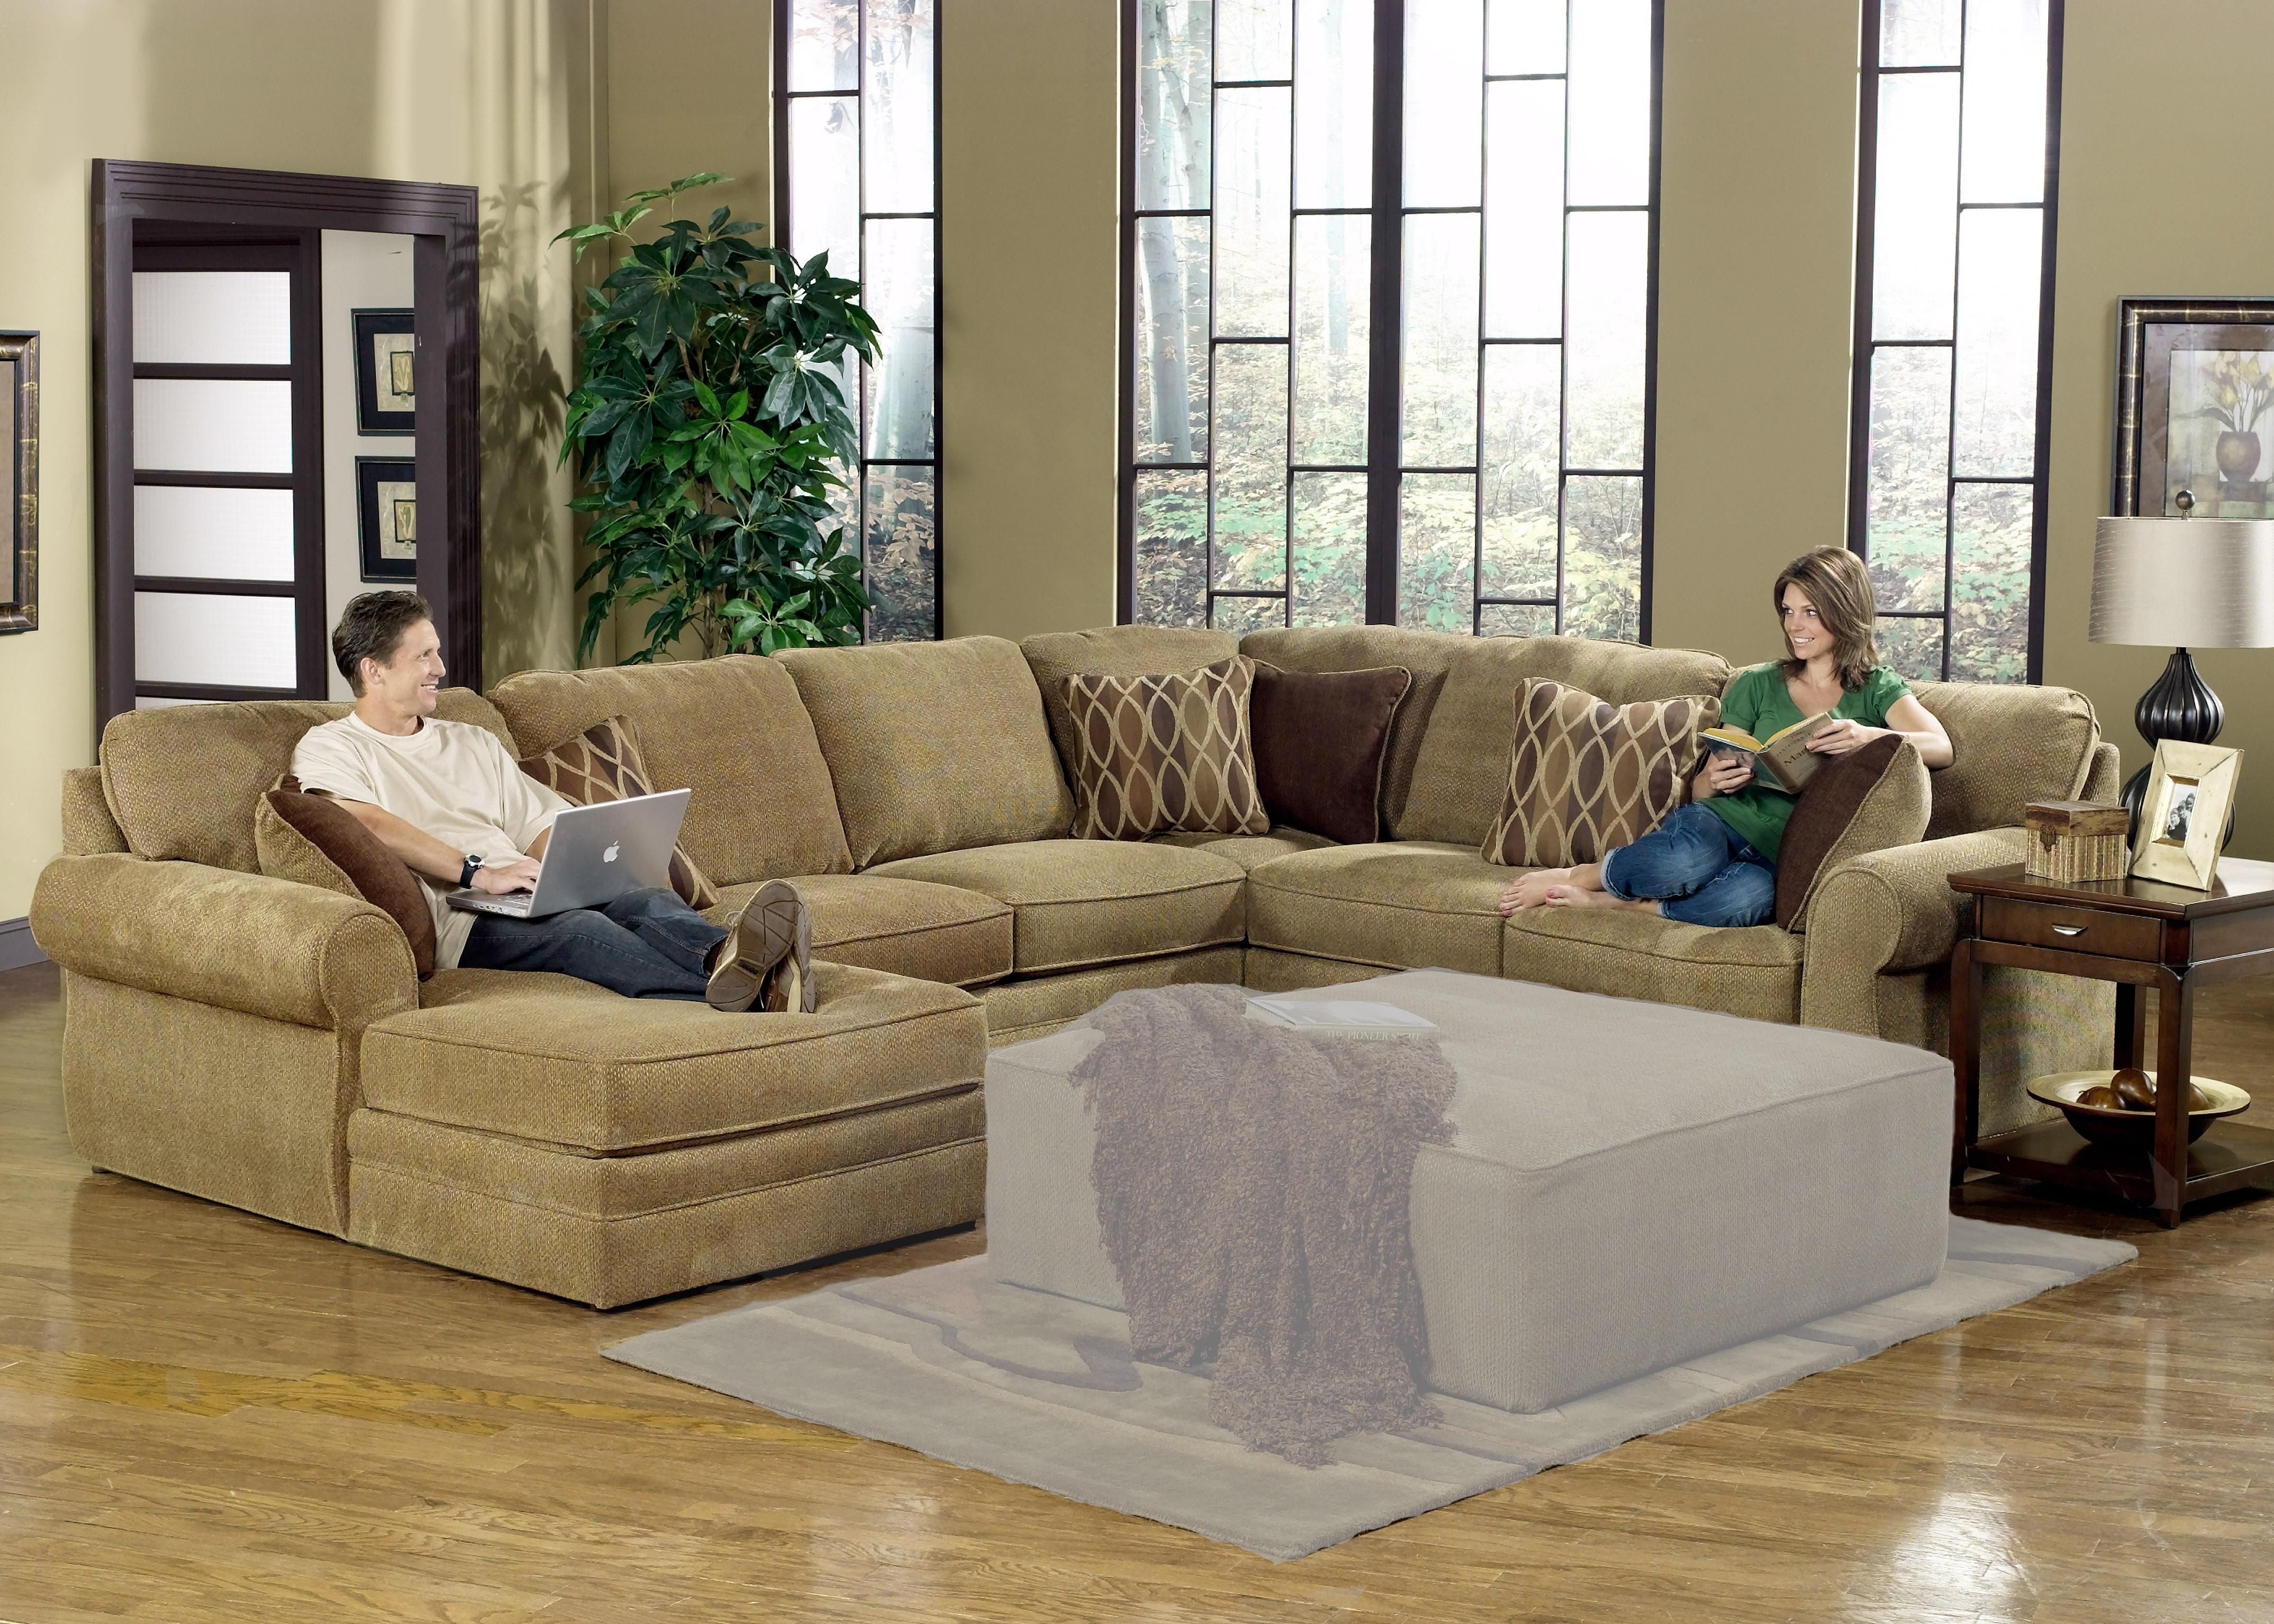 Remarkable Large Sectional Sofas With Chaise 39 With Additional For Ottawa Sectional Sofas (View 2 of 10)